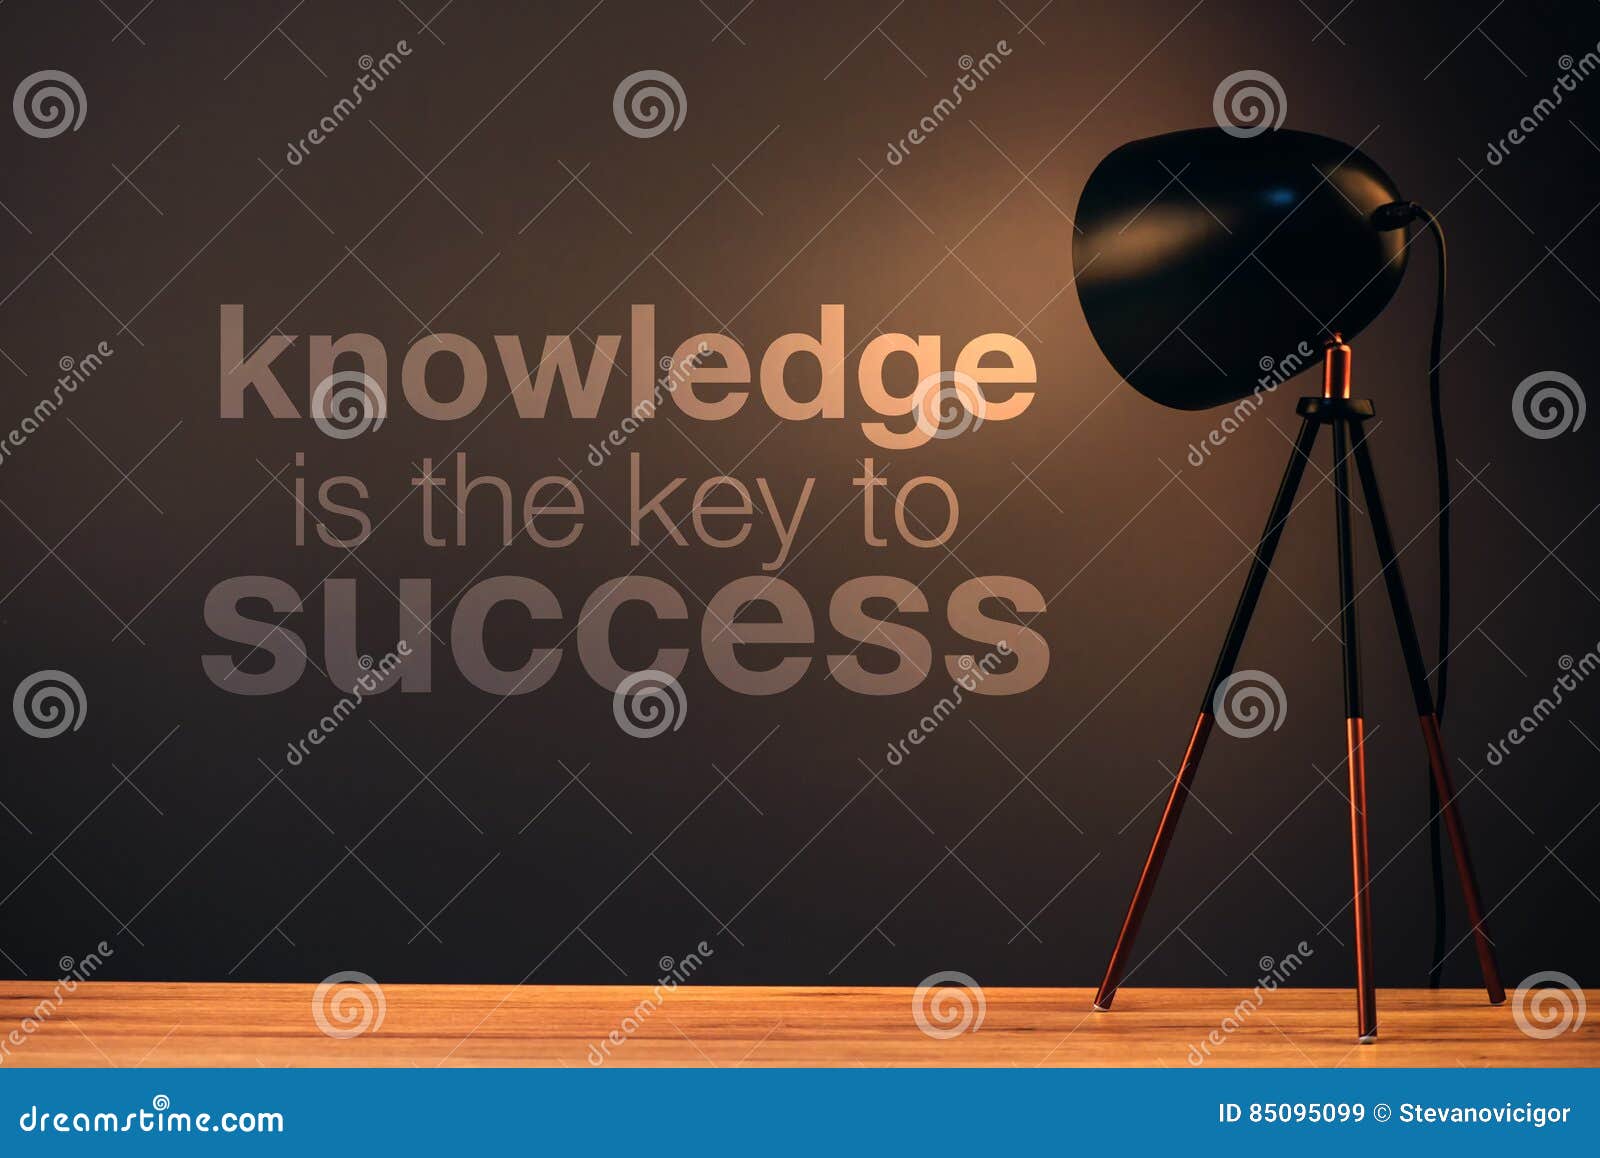 knowledge is the key to success